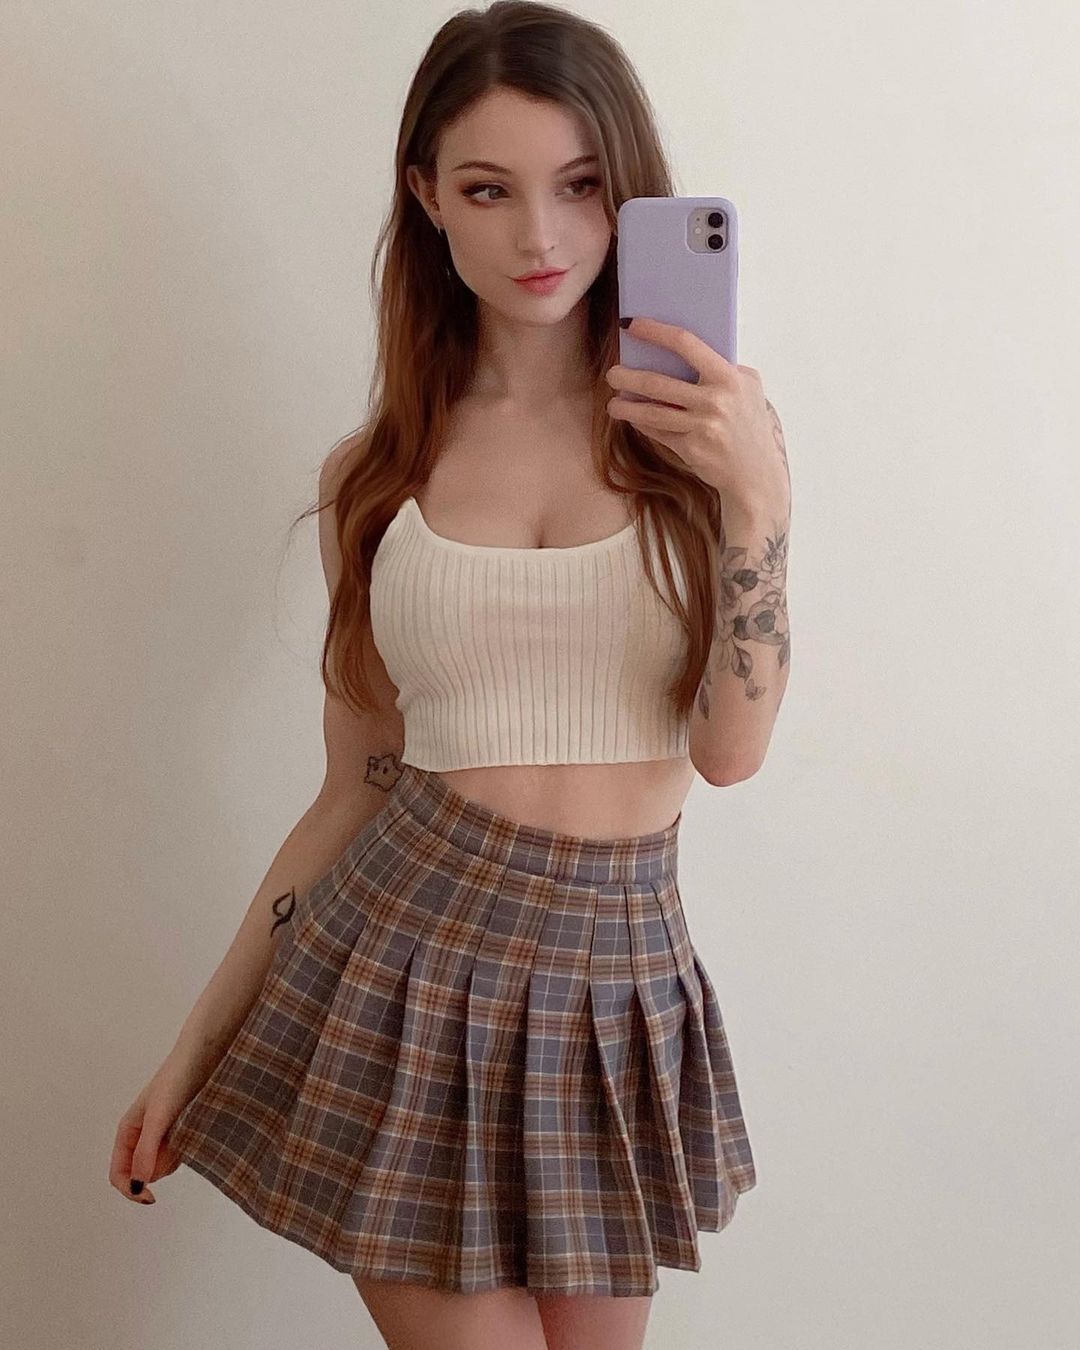 Dainty Wilder in cream crop top and checked mini skirt